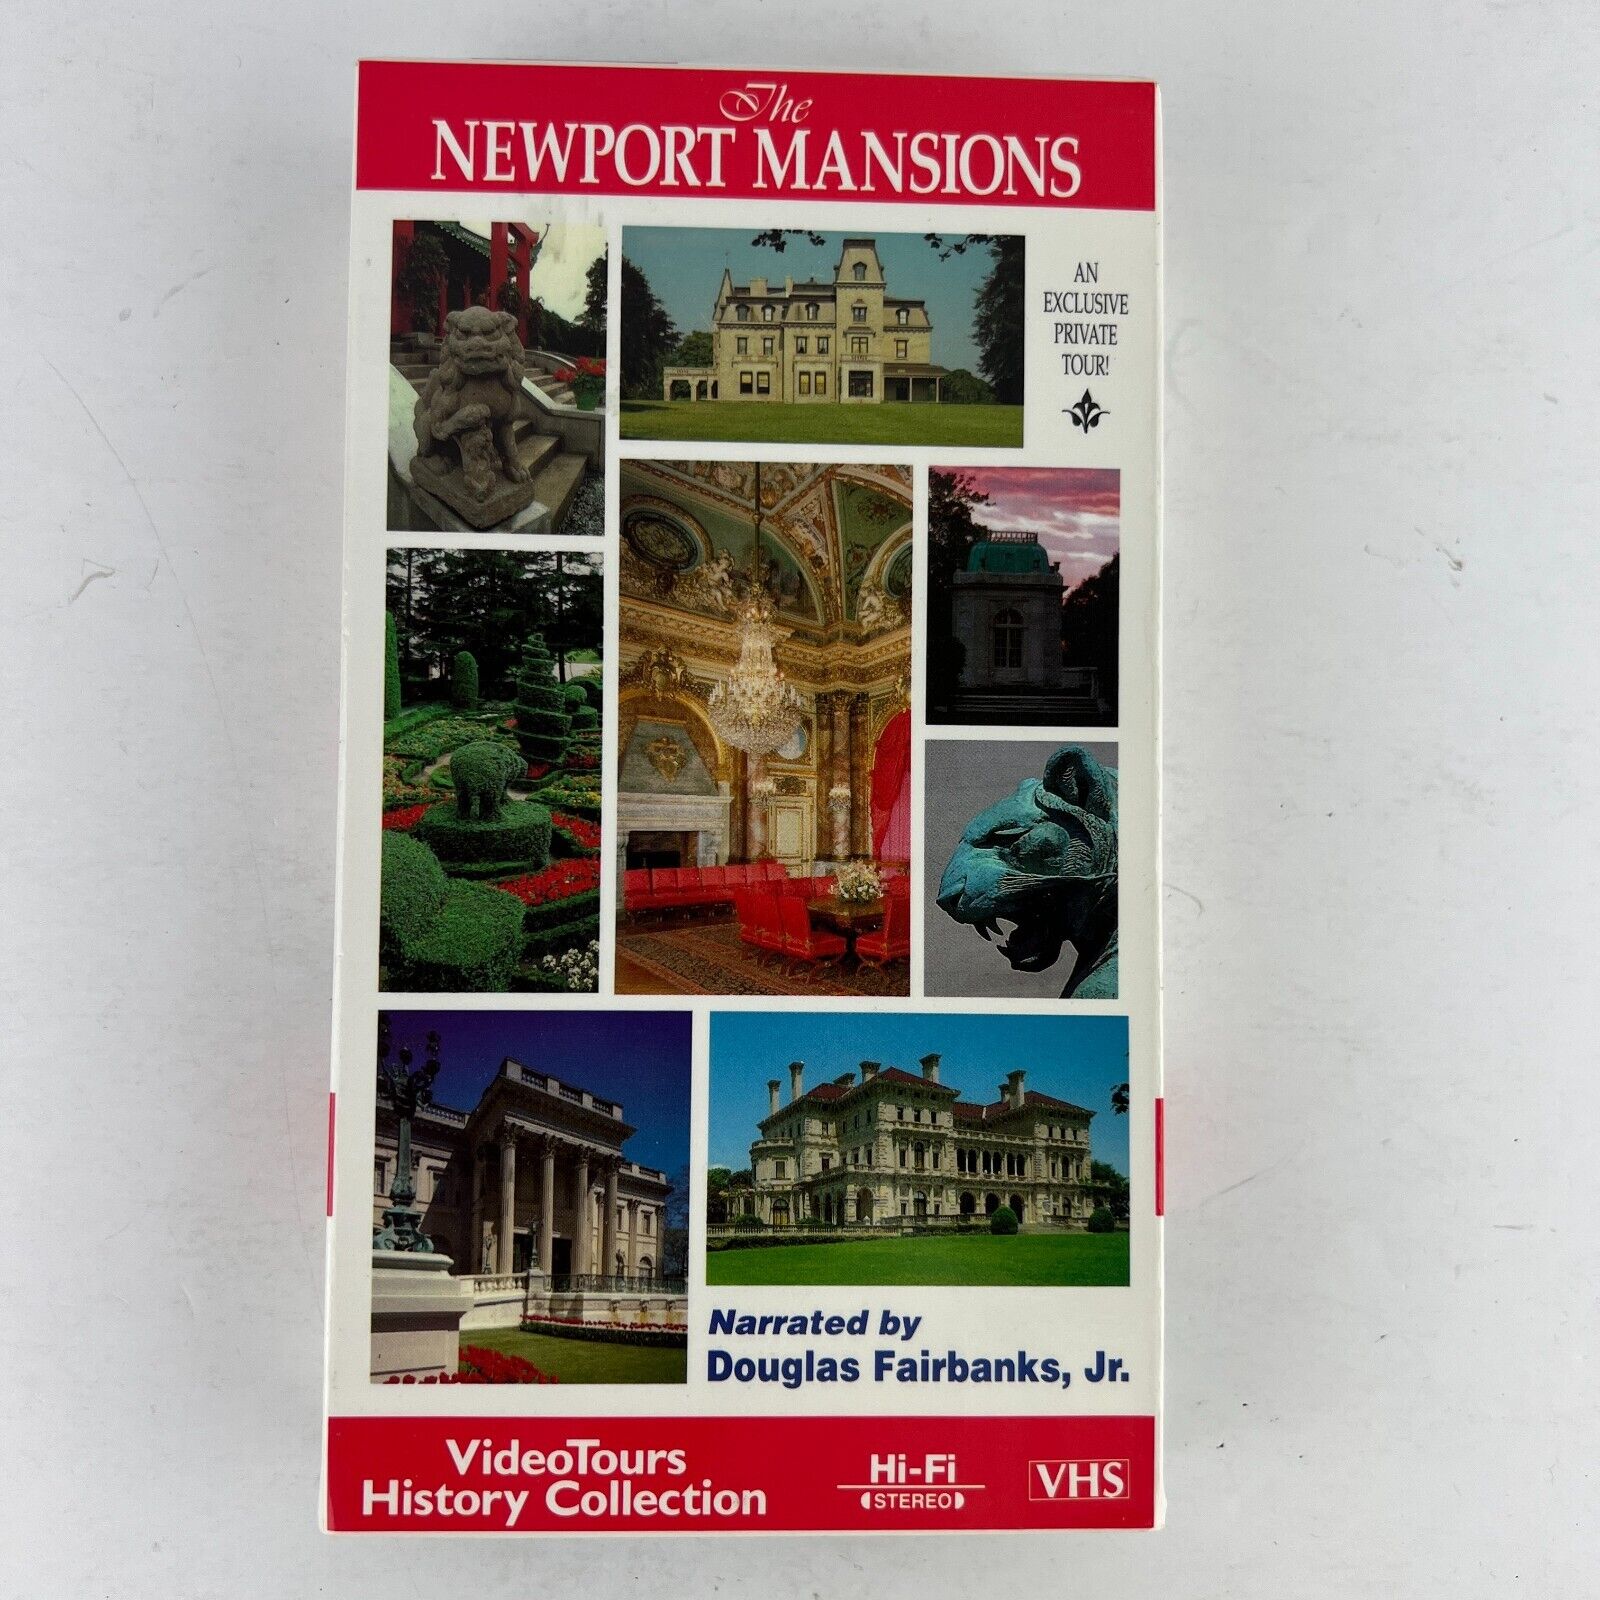 The Newport Mansions VHS Video Tour